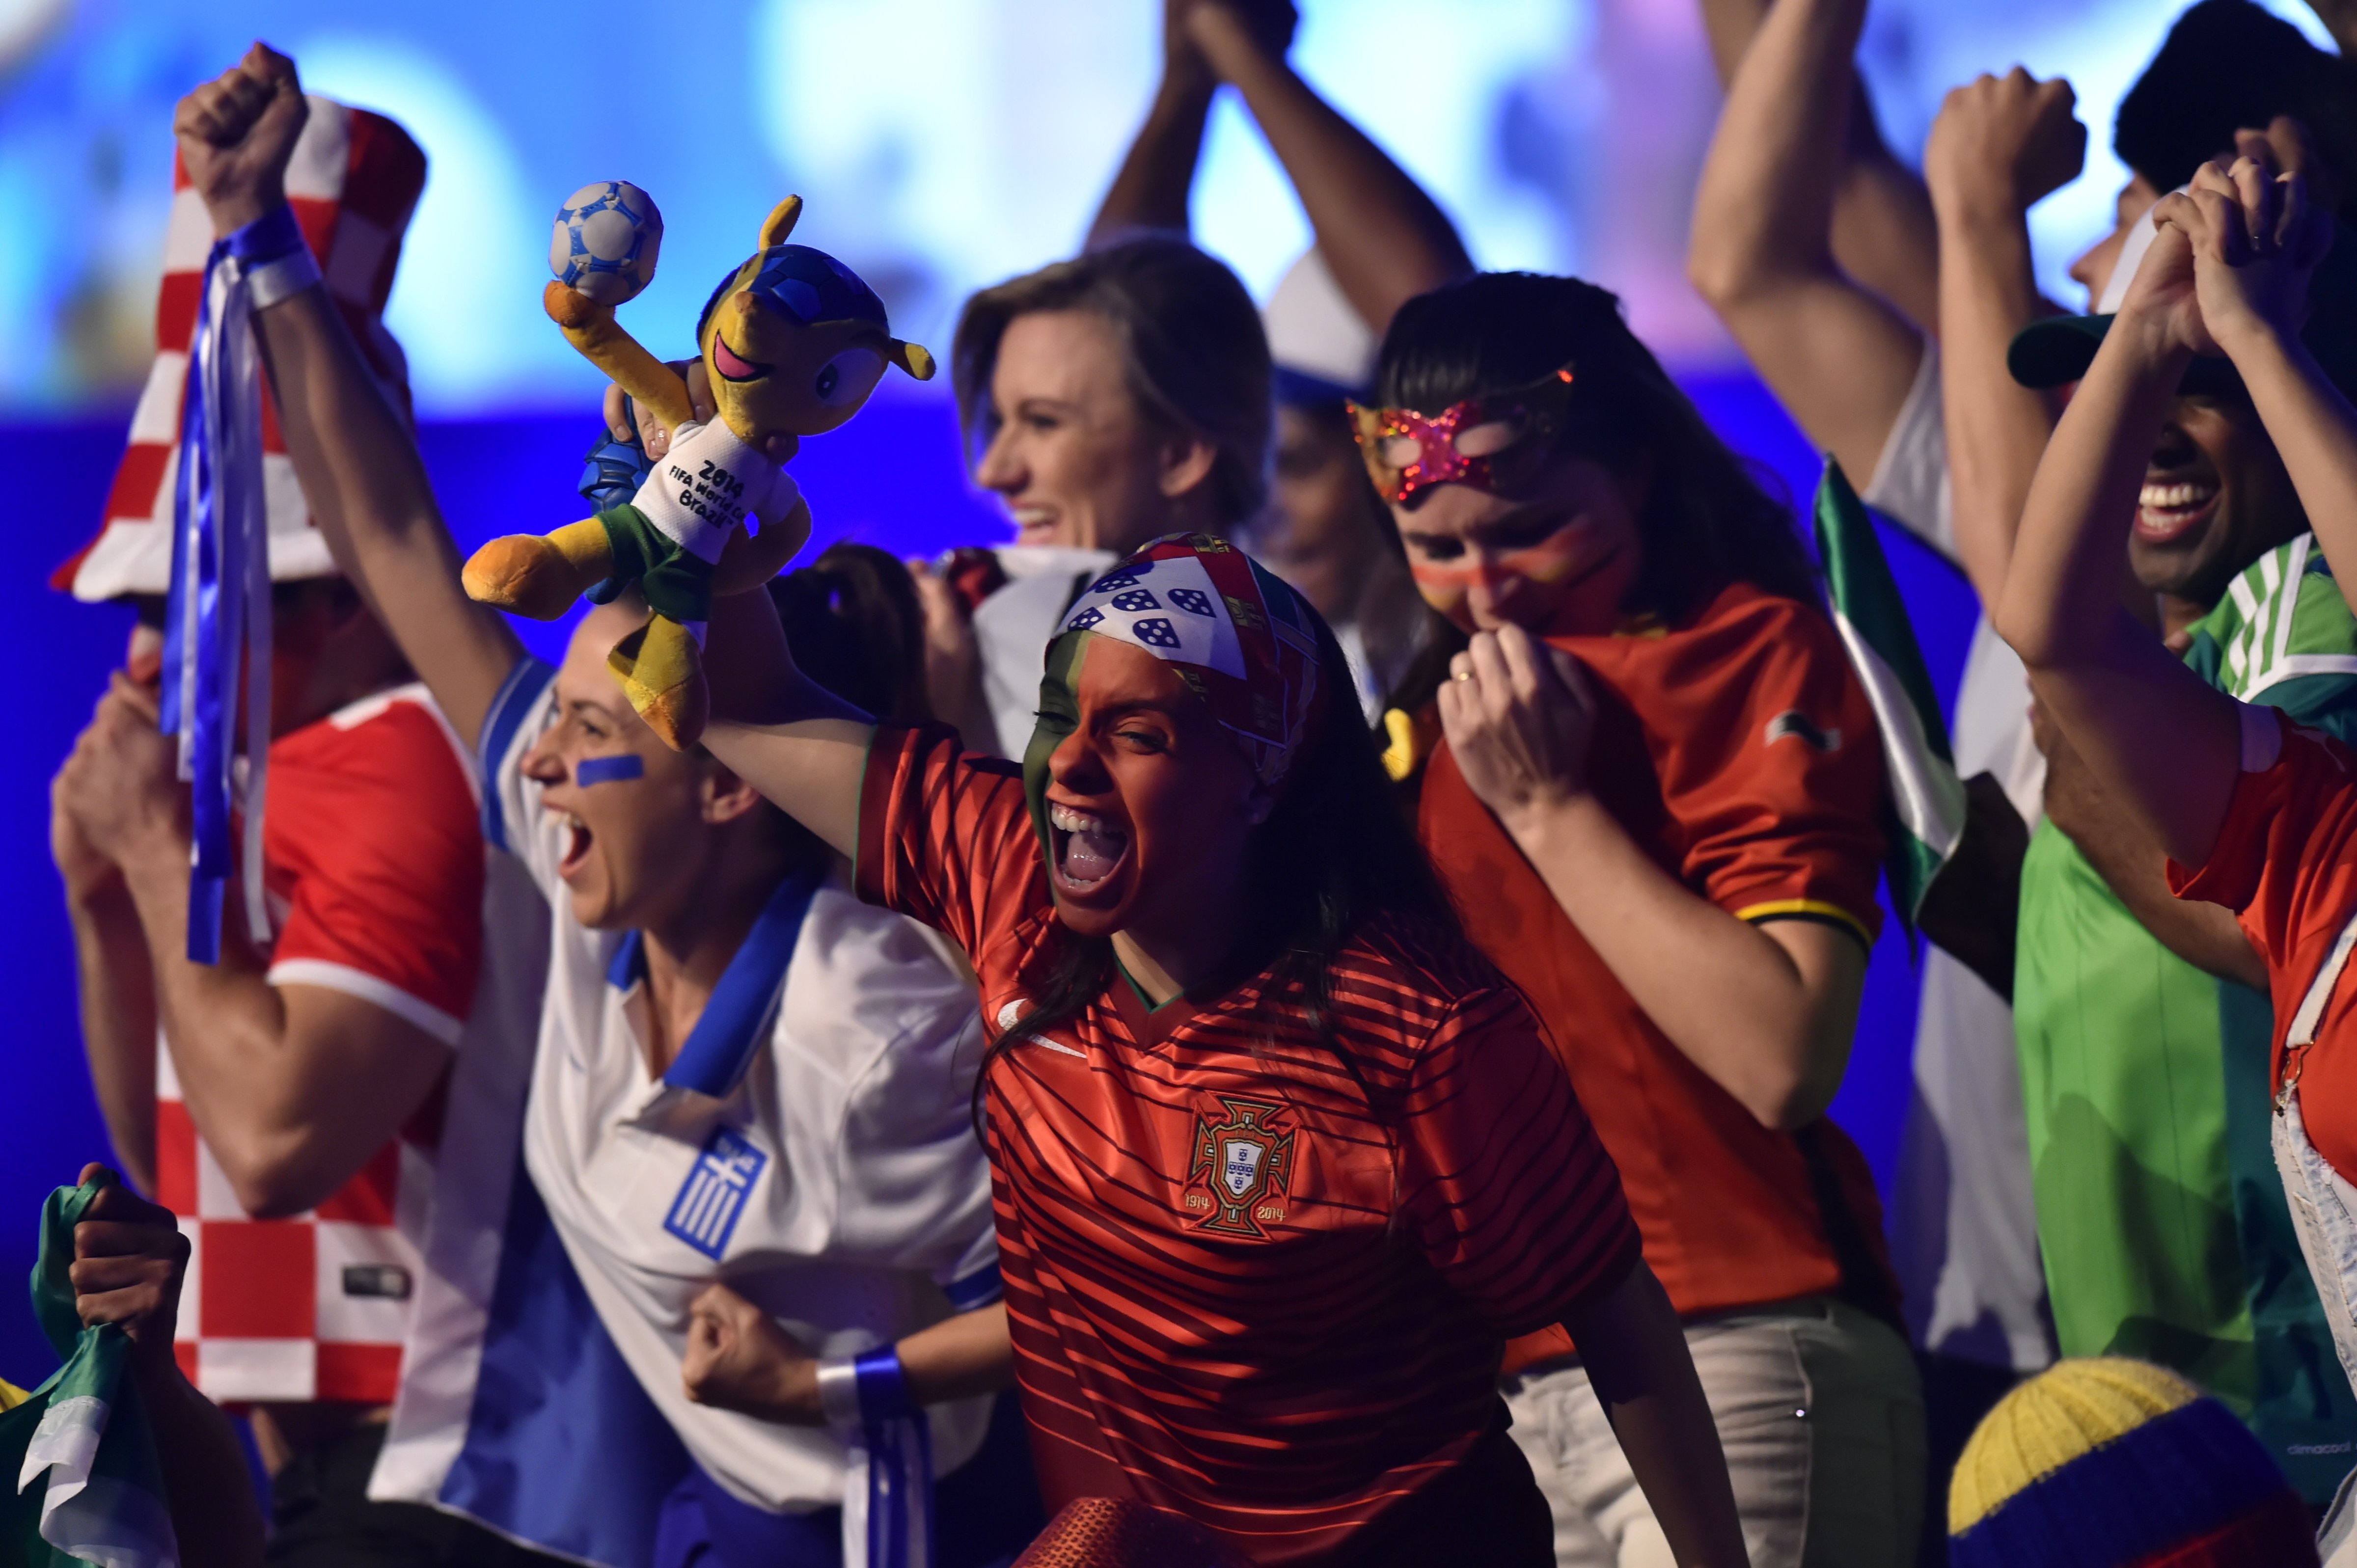 Performers dressed as football fans dance on stage during the opening of the FIFA Congress in Sao Paulo on June 10, 2014, two days before the opening match of the 2014 FIFA World Cup in Brazil. (Nelson Almieda—AFP/Getty Images)